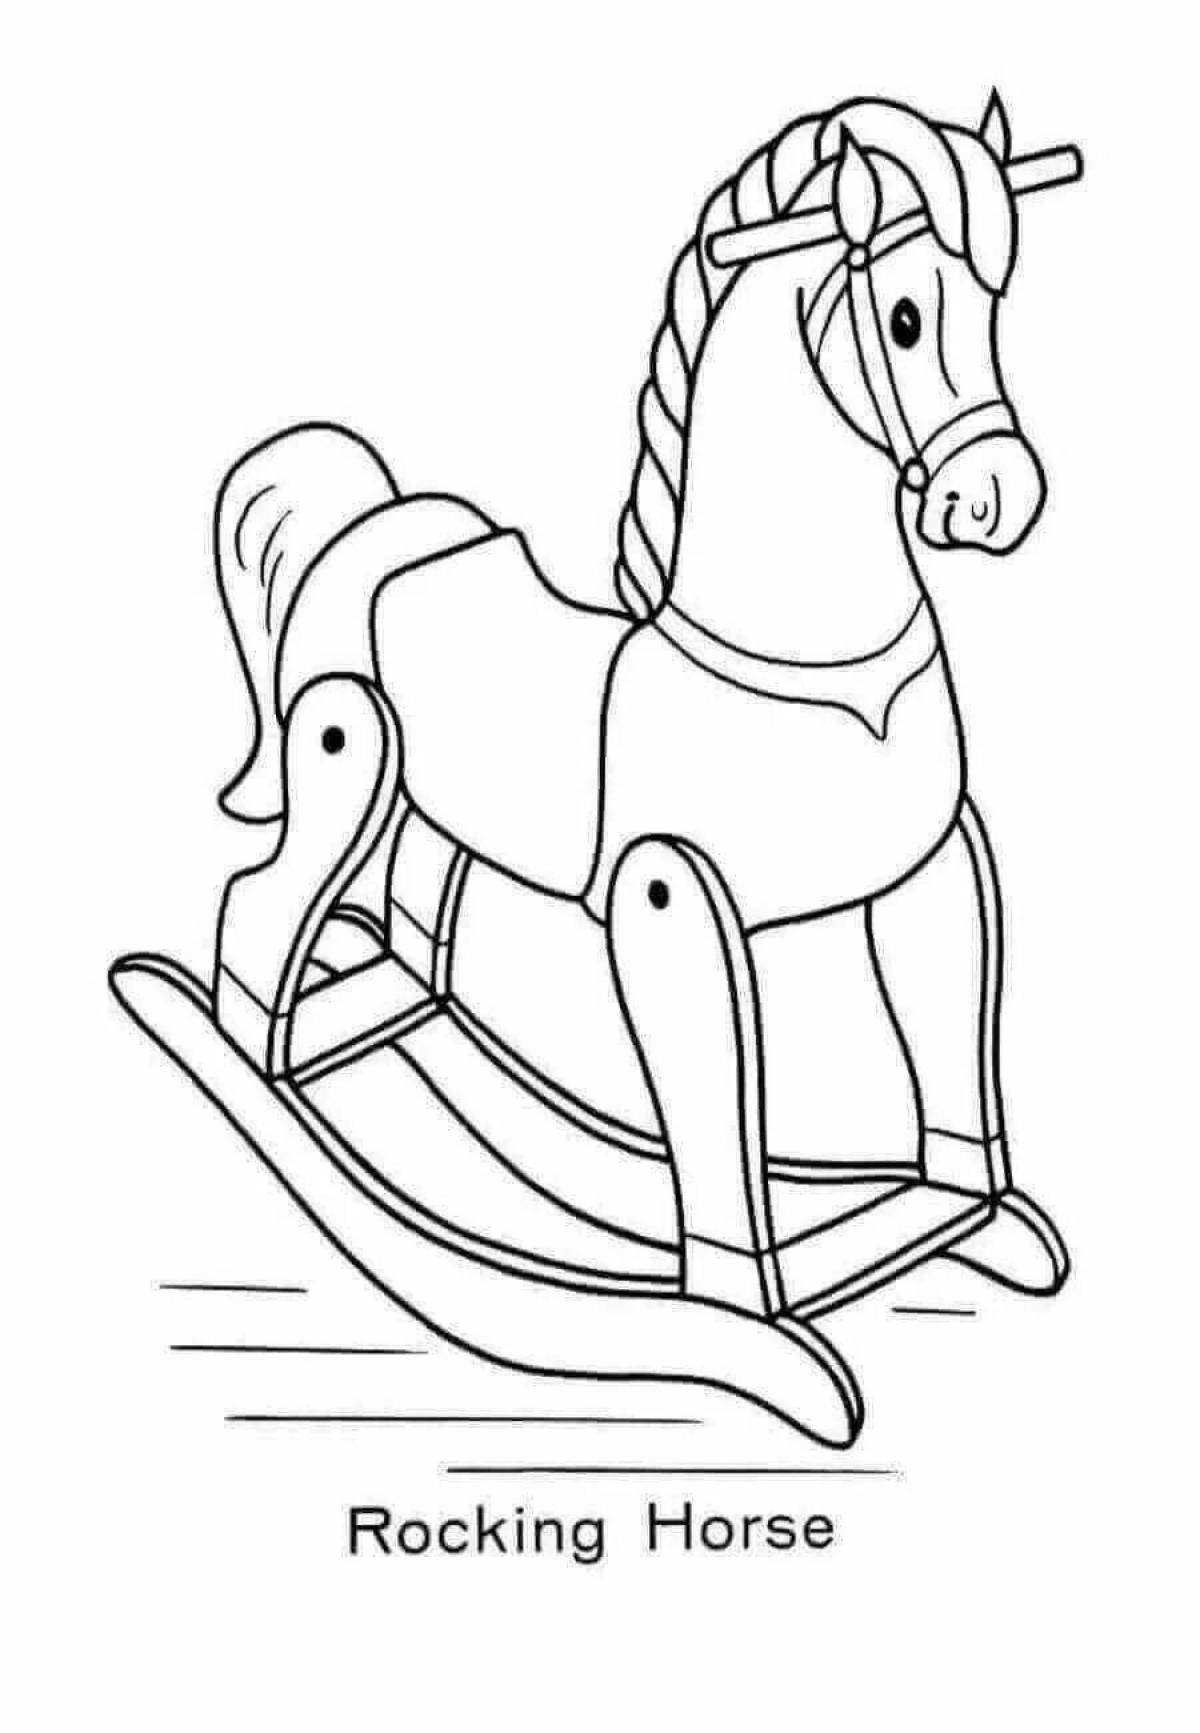 Great horse coloring page